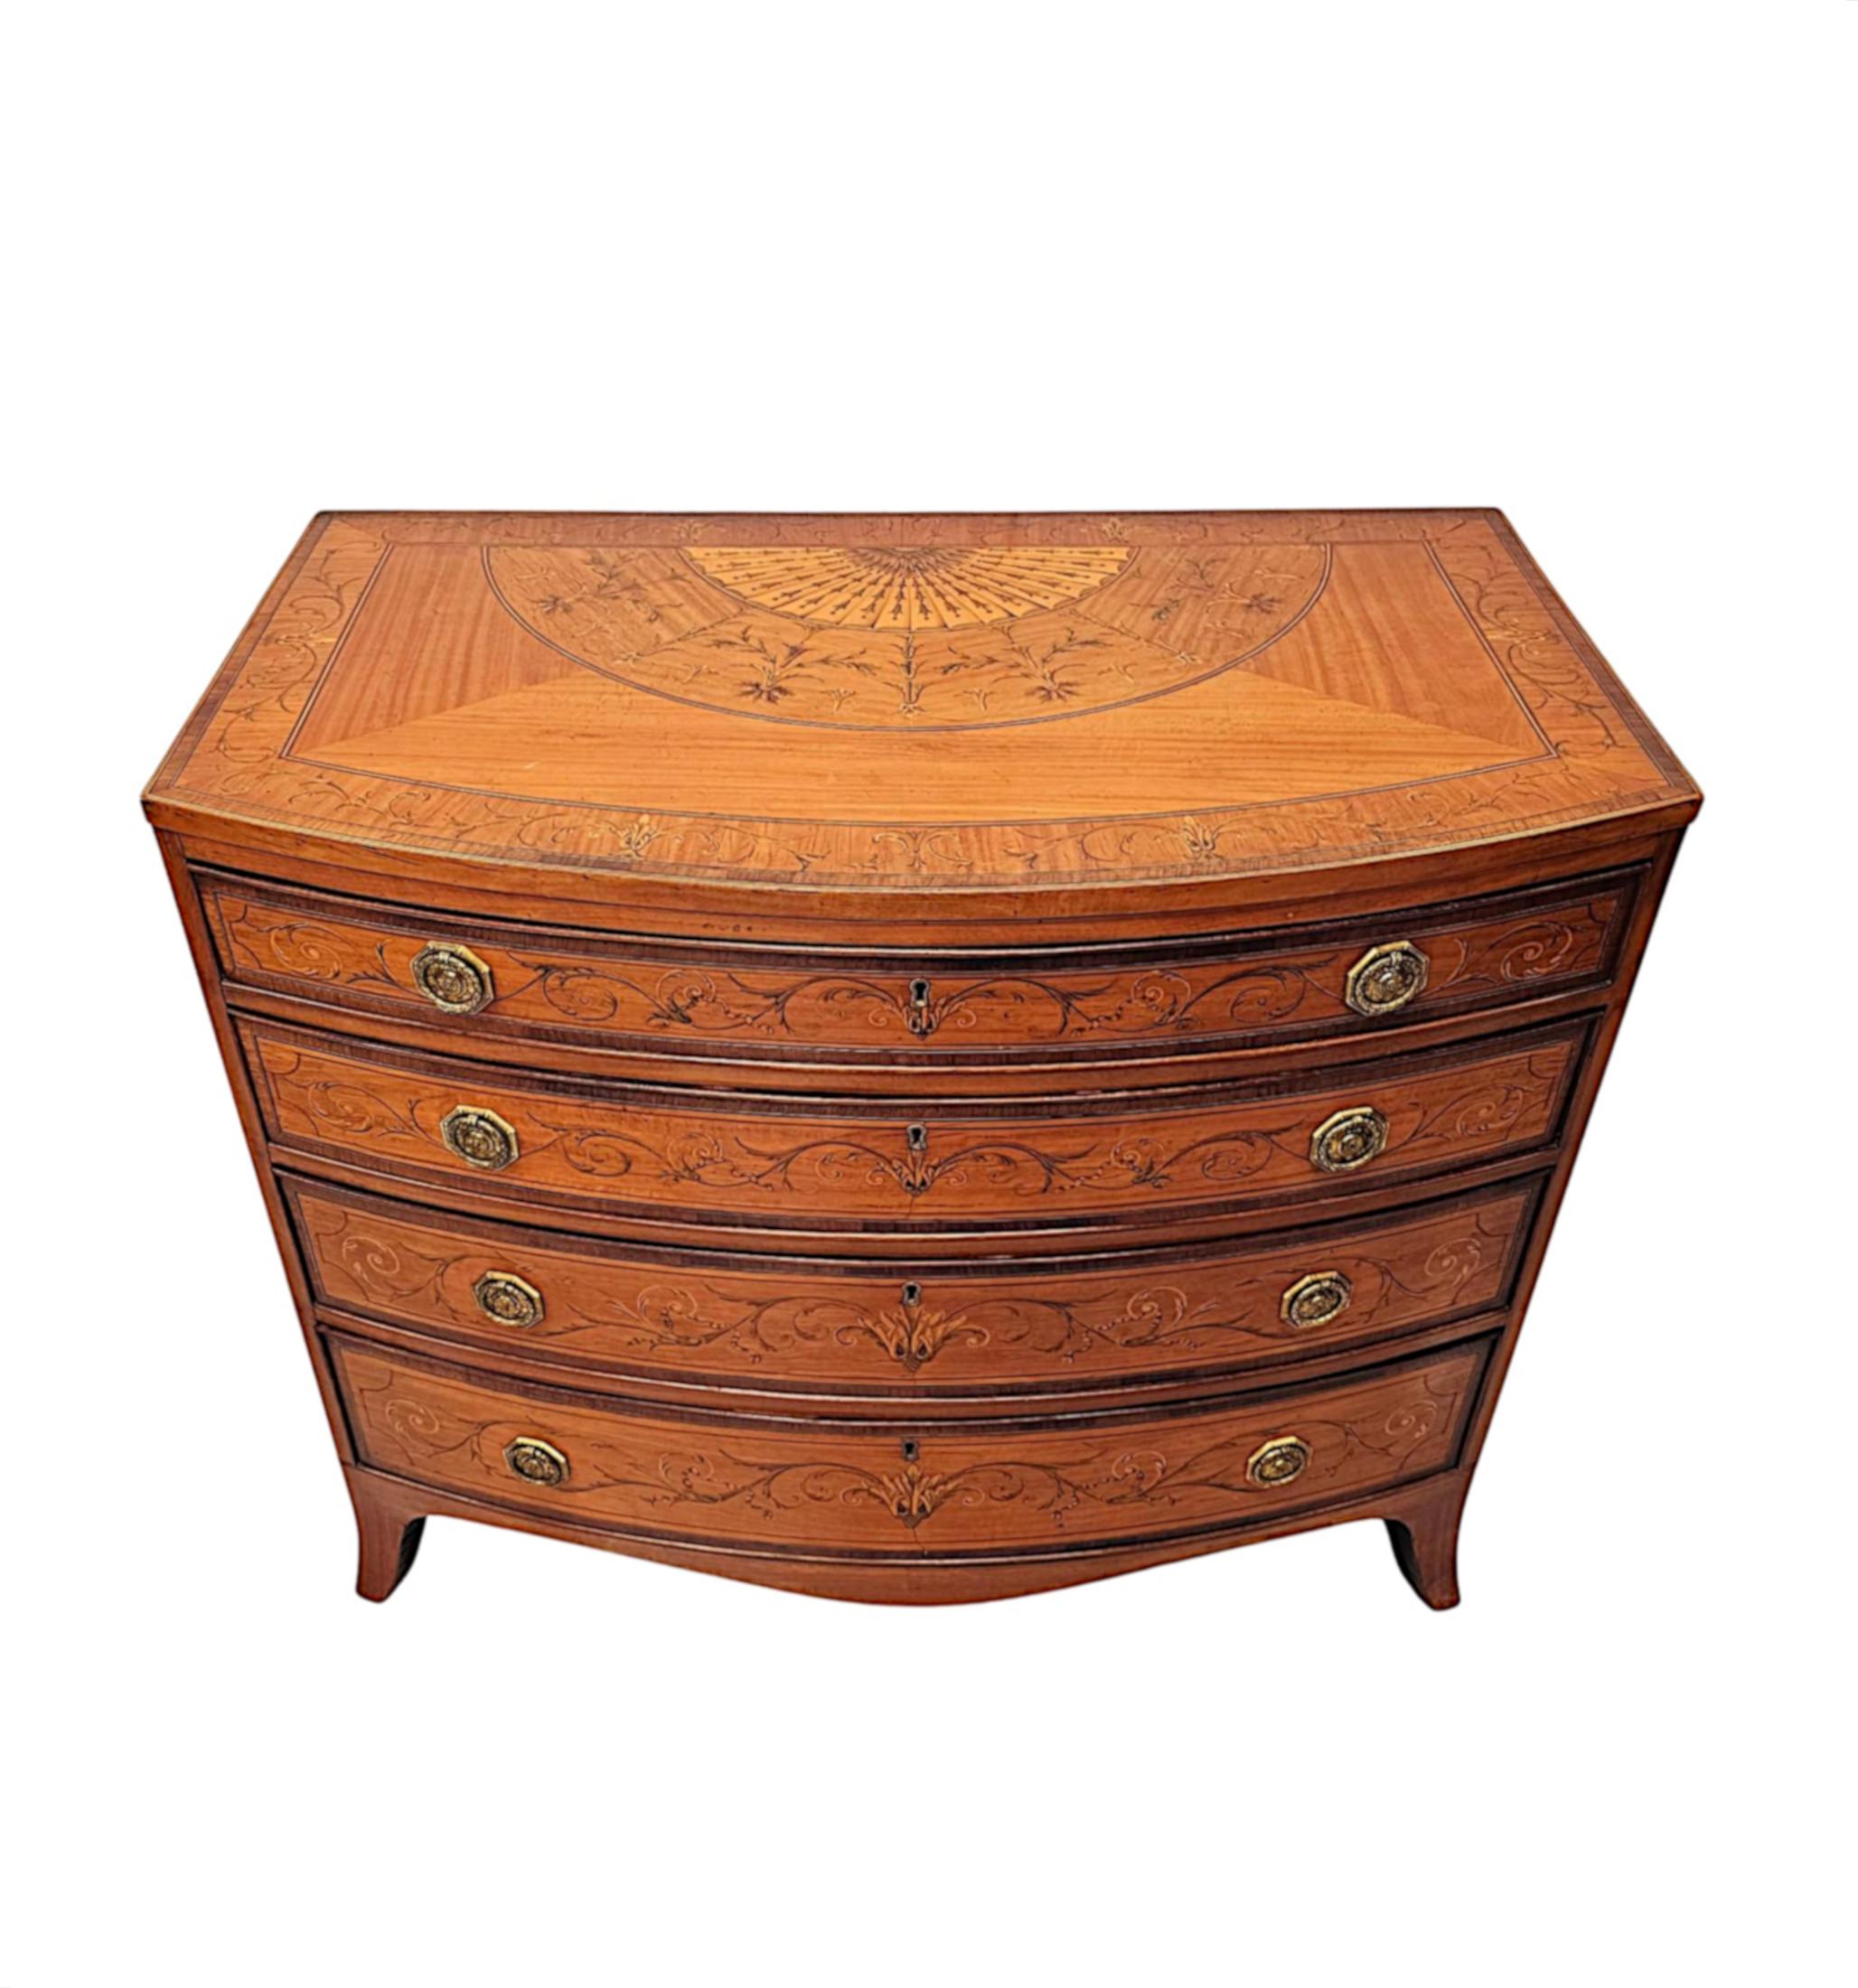 English  A Very Rare Early 19th Century Regency Bowfronted Chest of Drawers For Sale